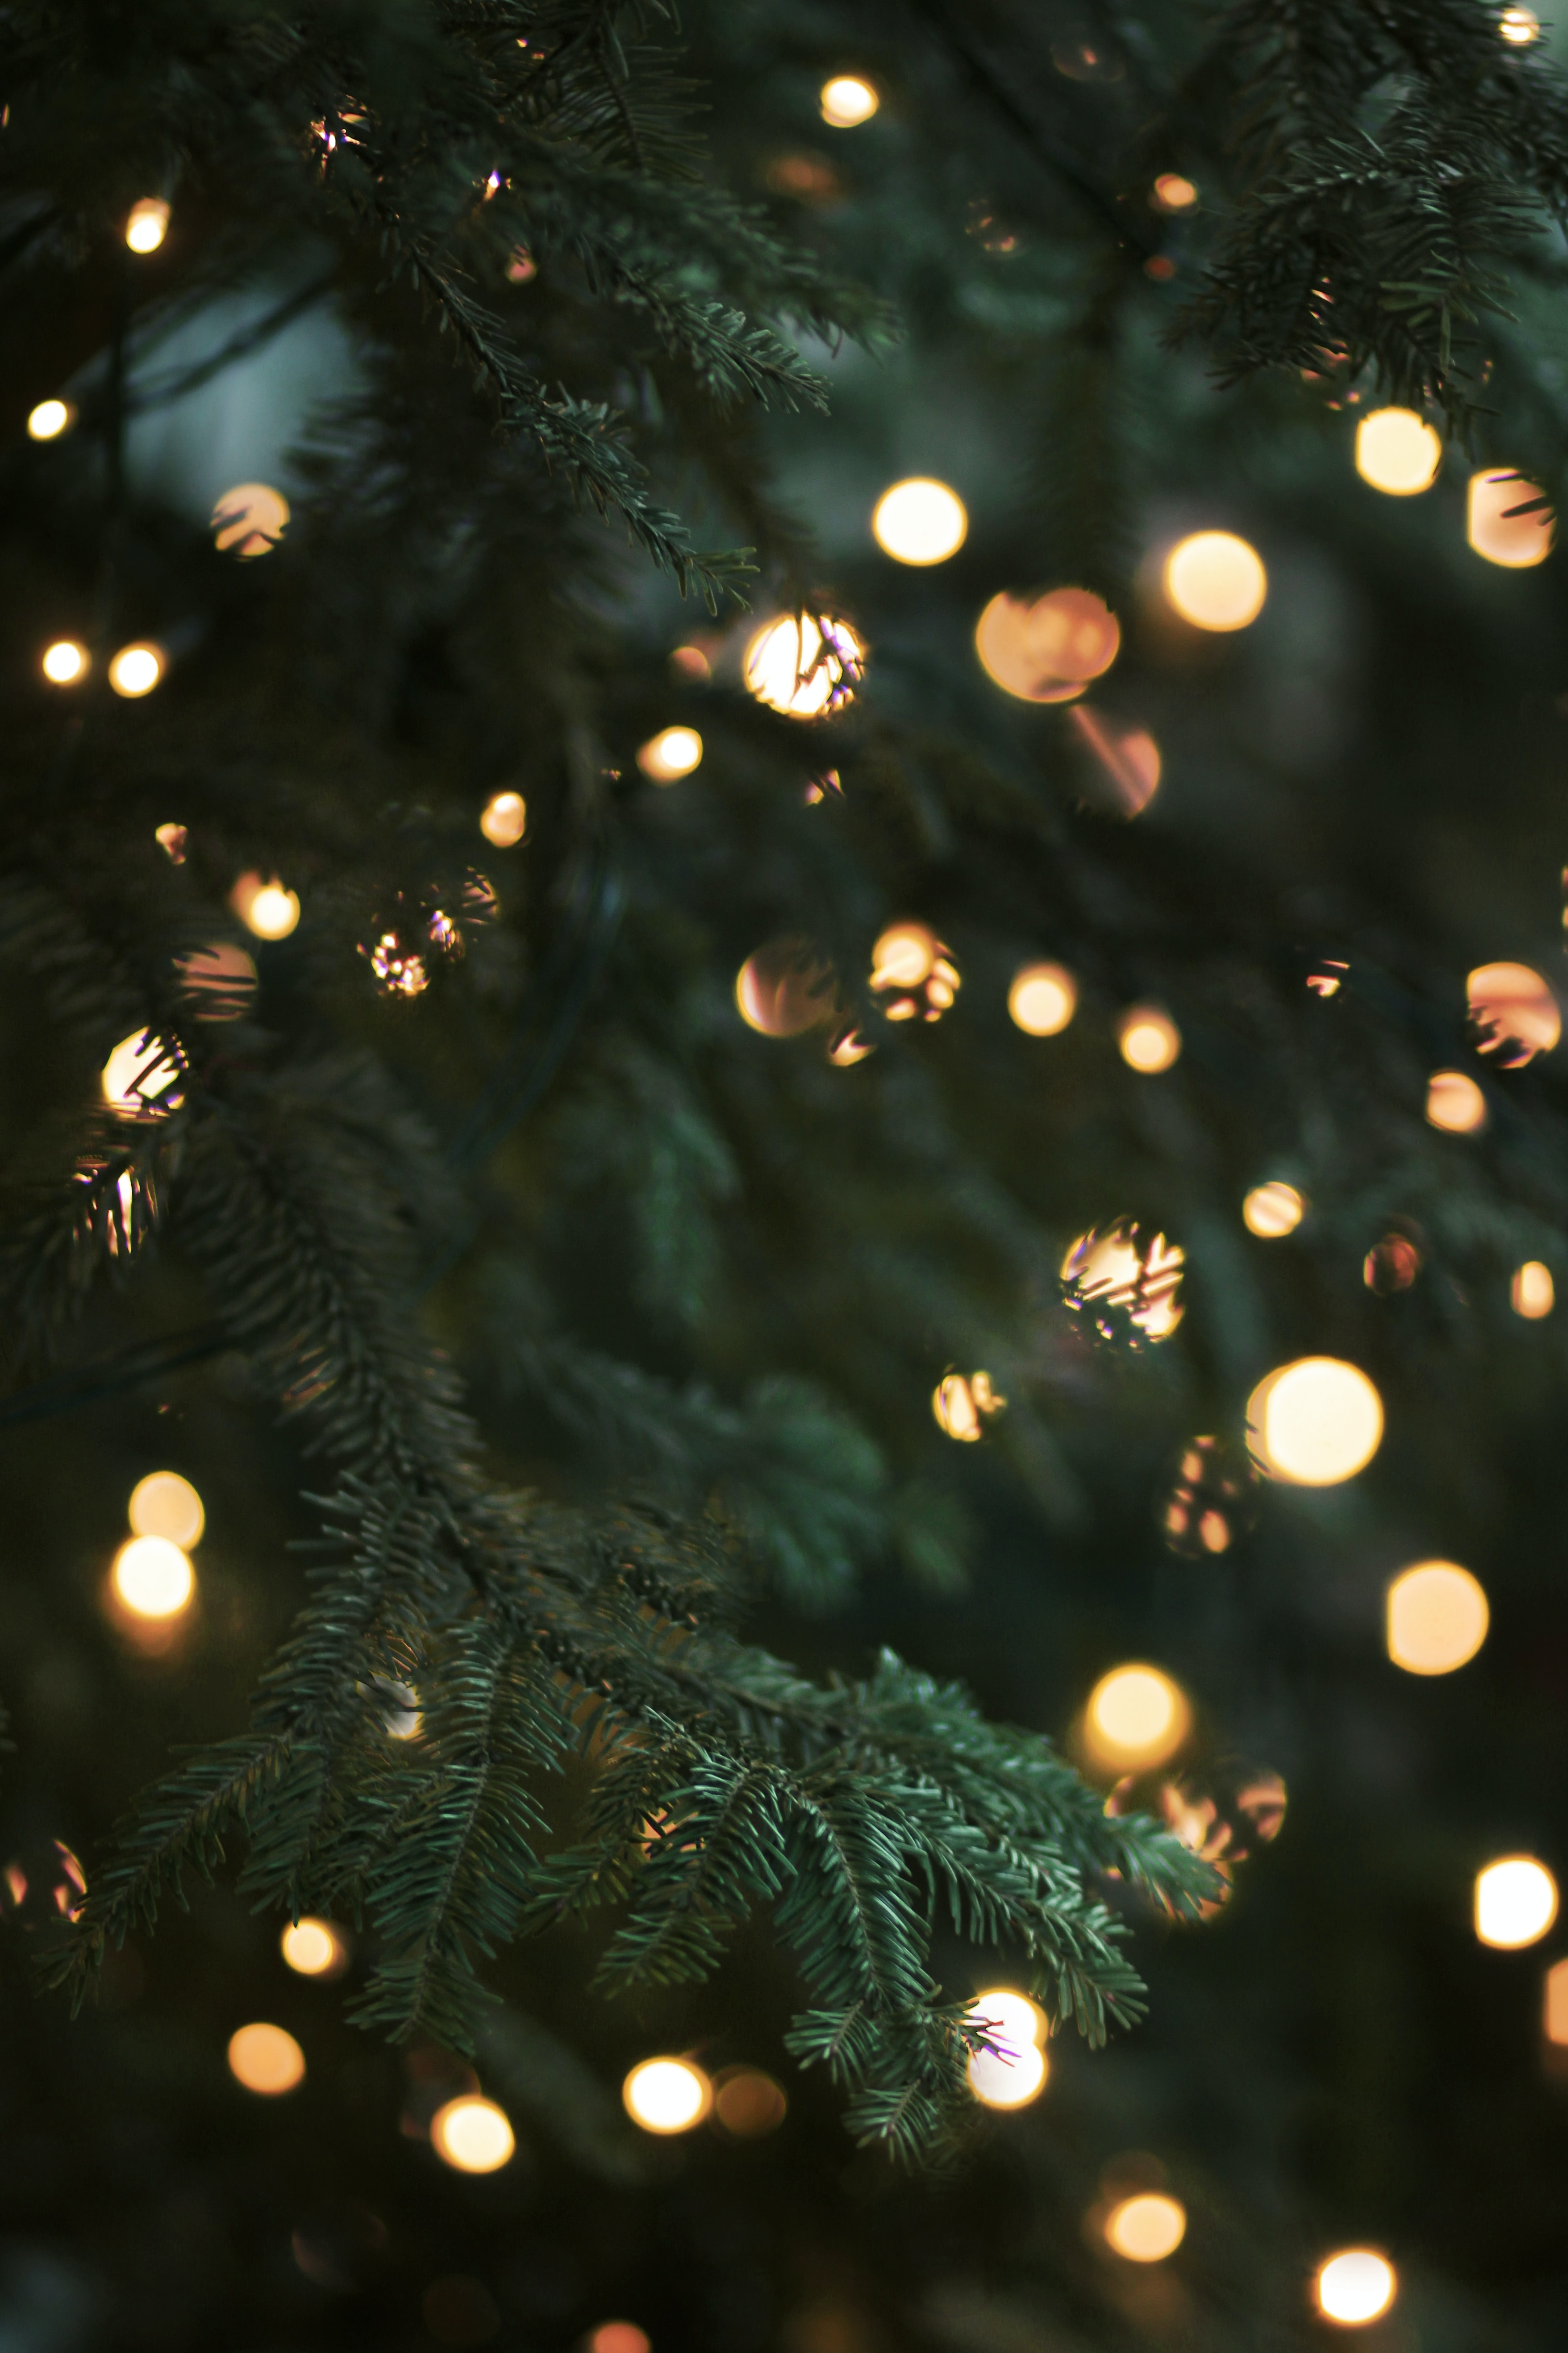 A Christmas Tree lit with spherical golden lights